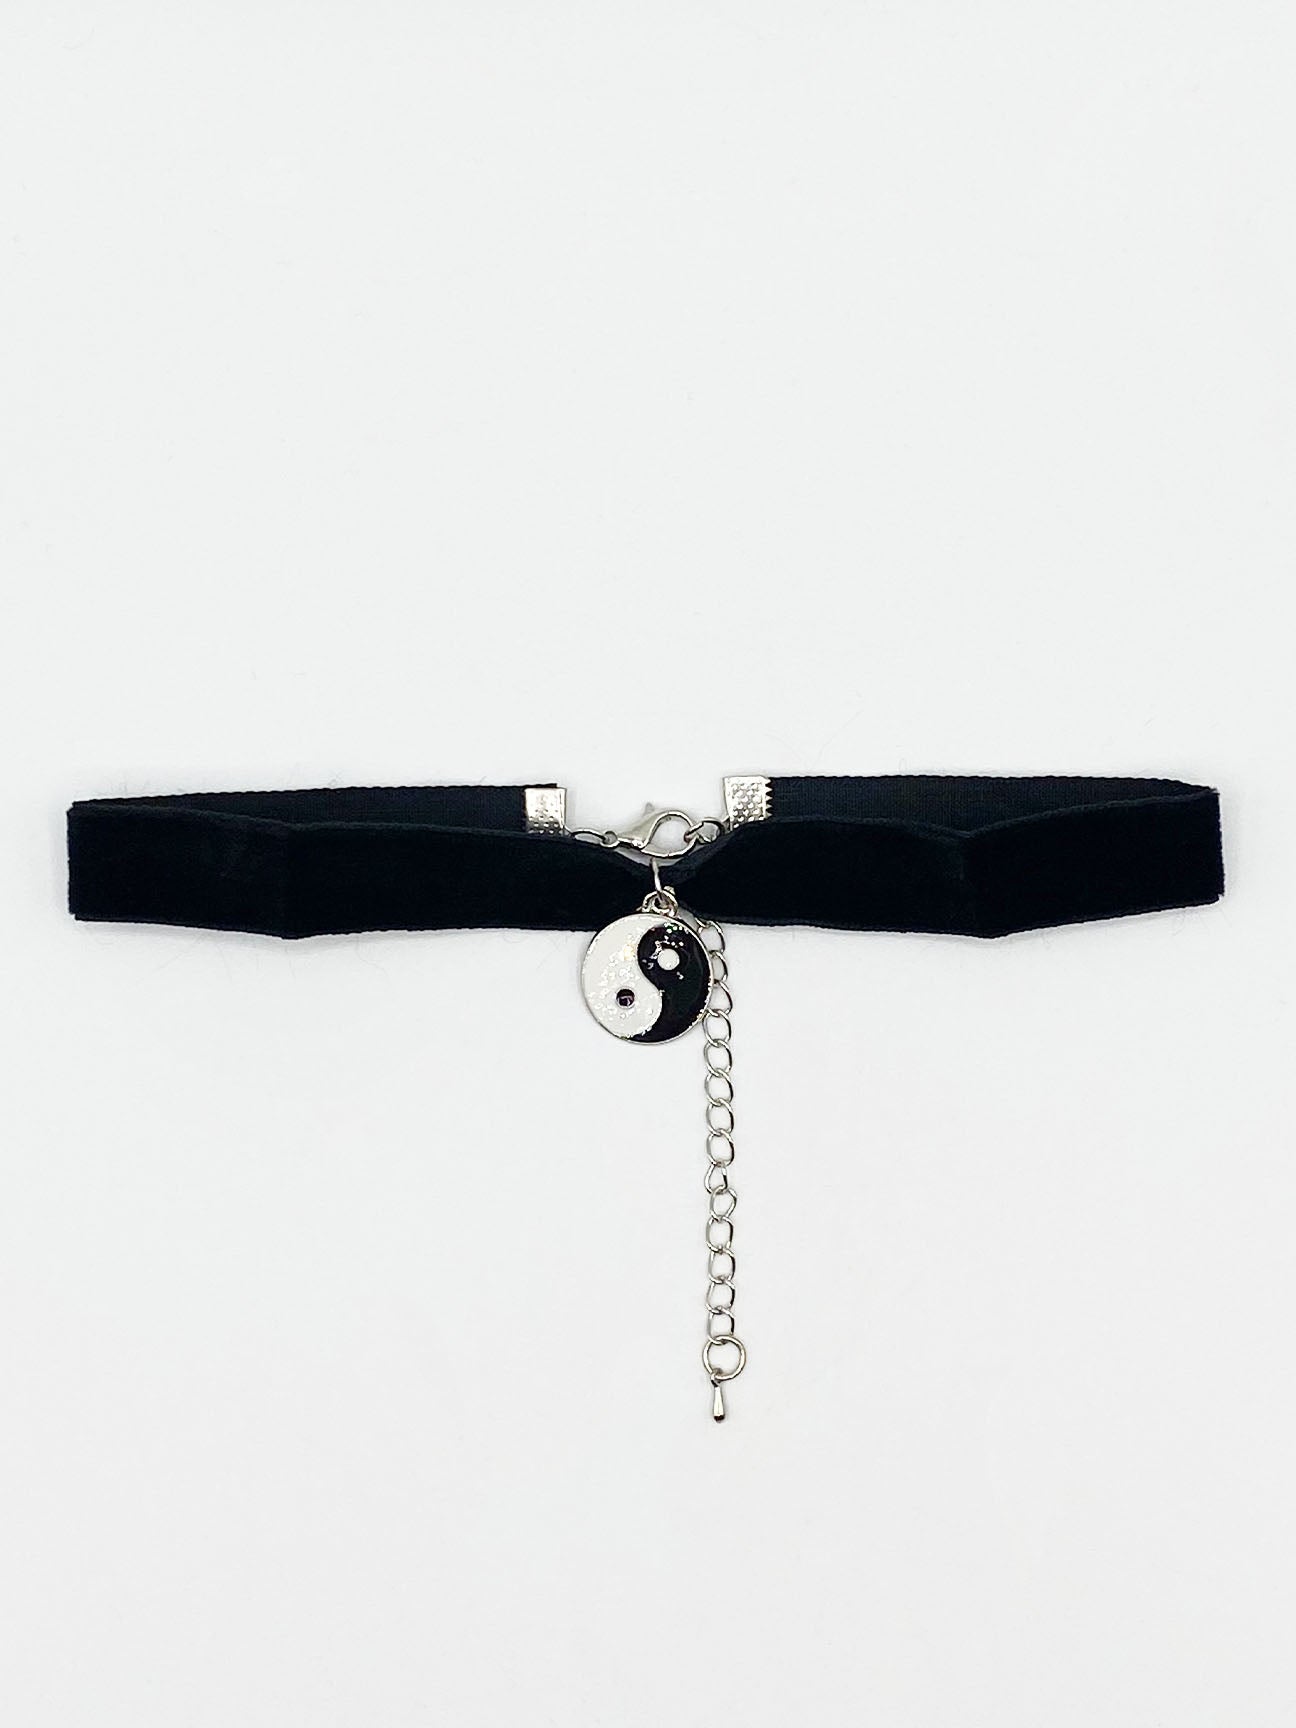 Black Faux Velvet Choker Necklace with Ying Yang Charm